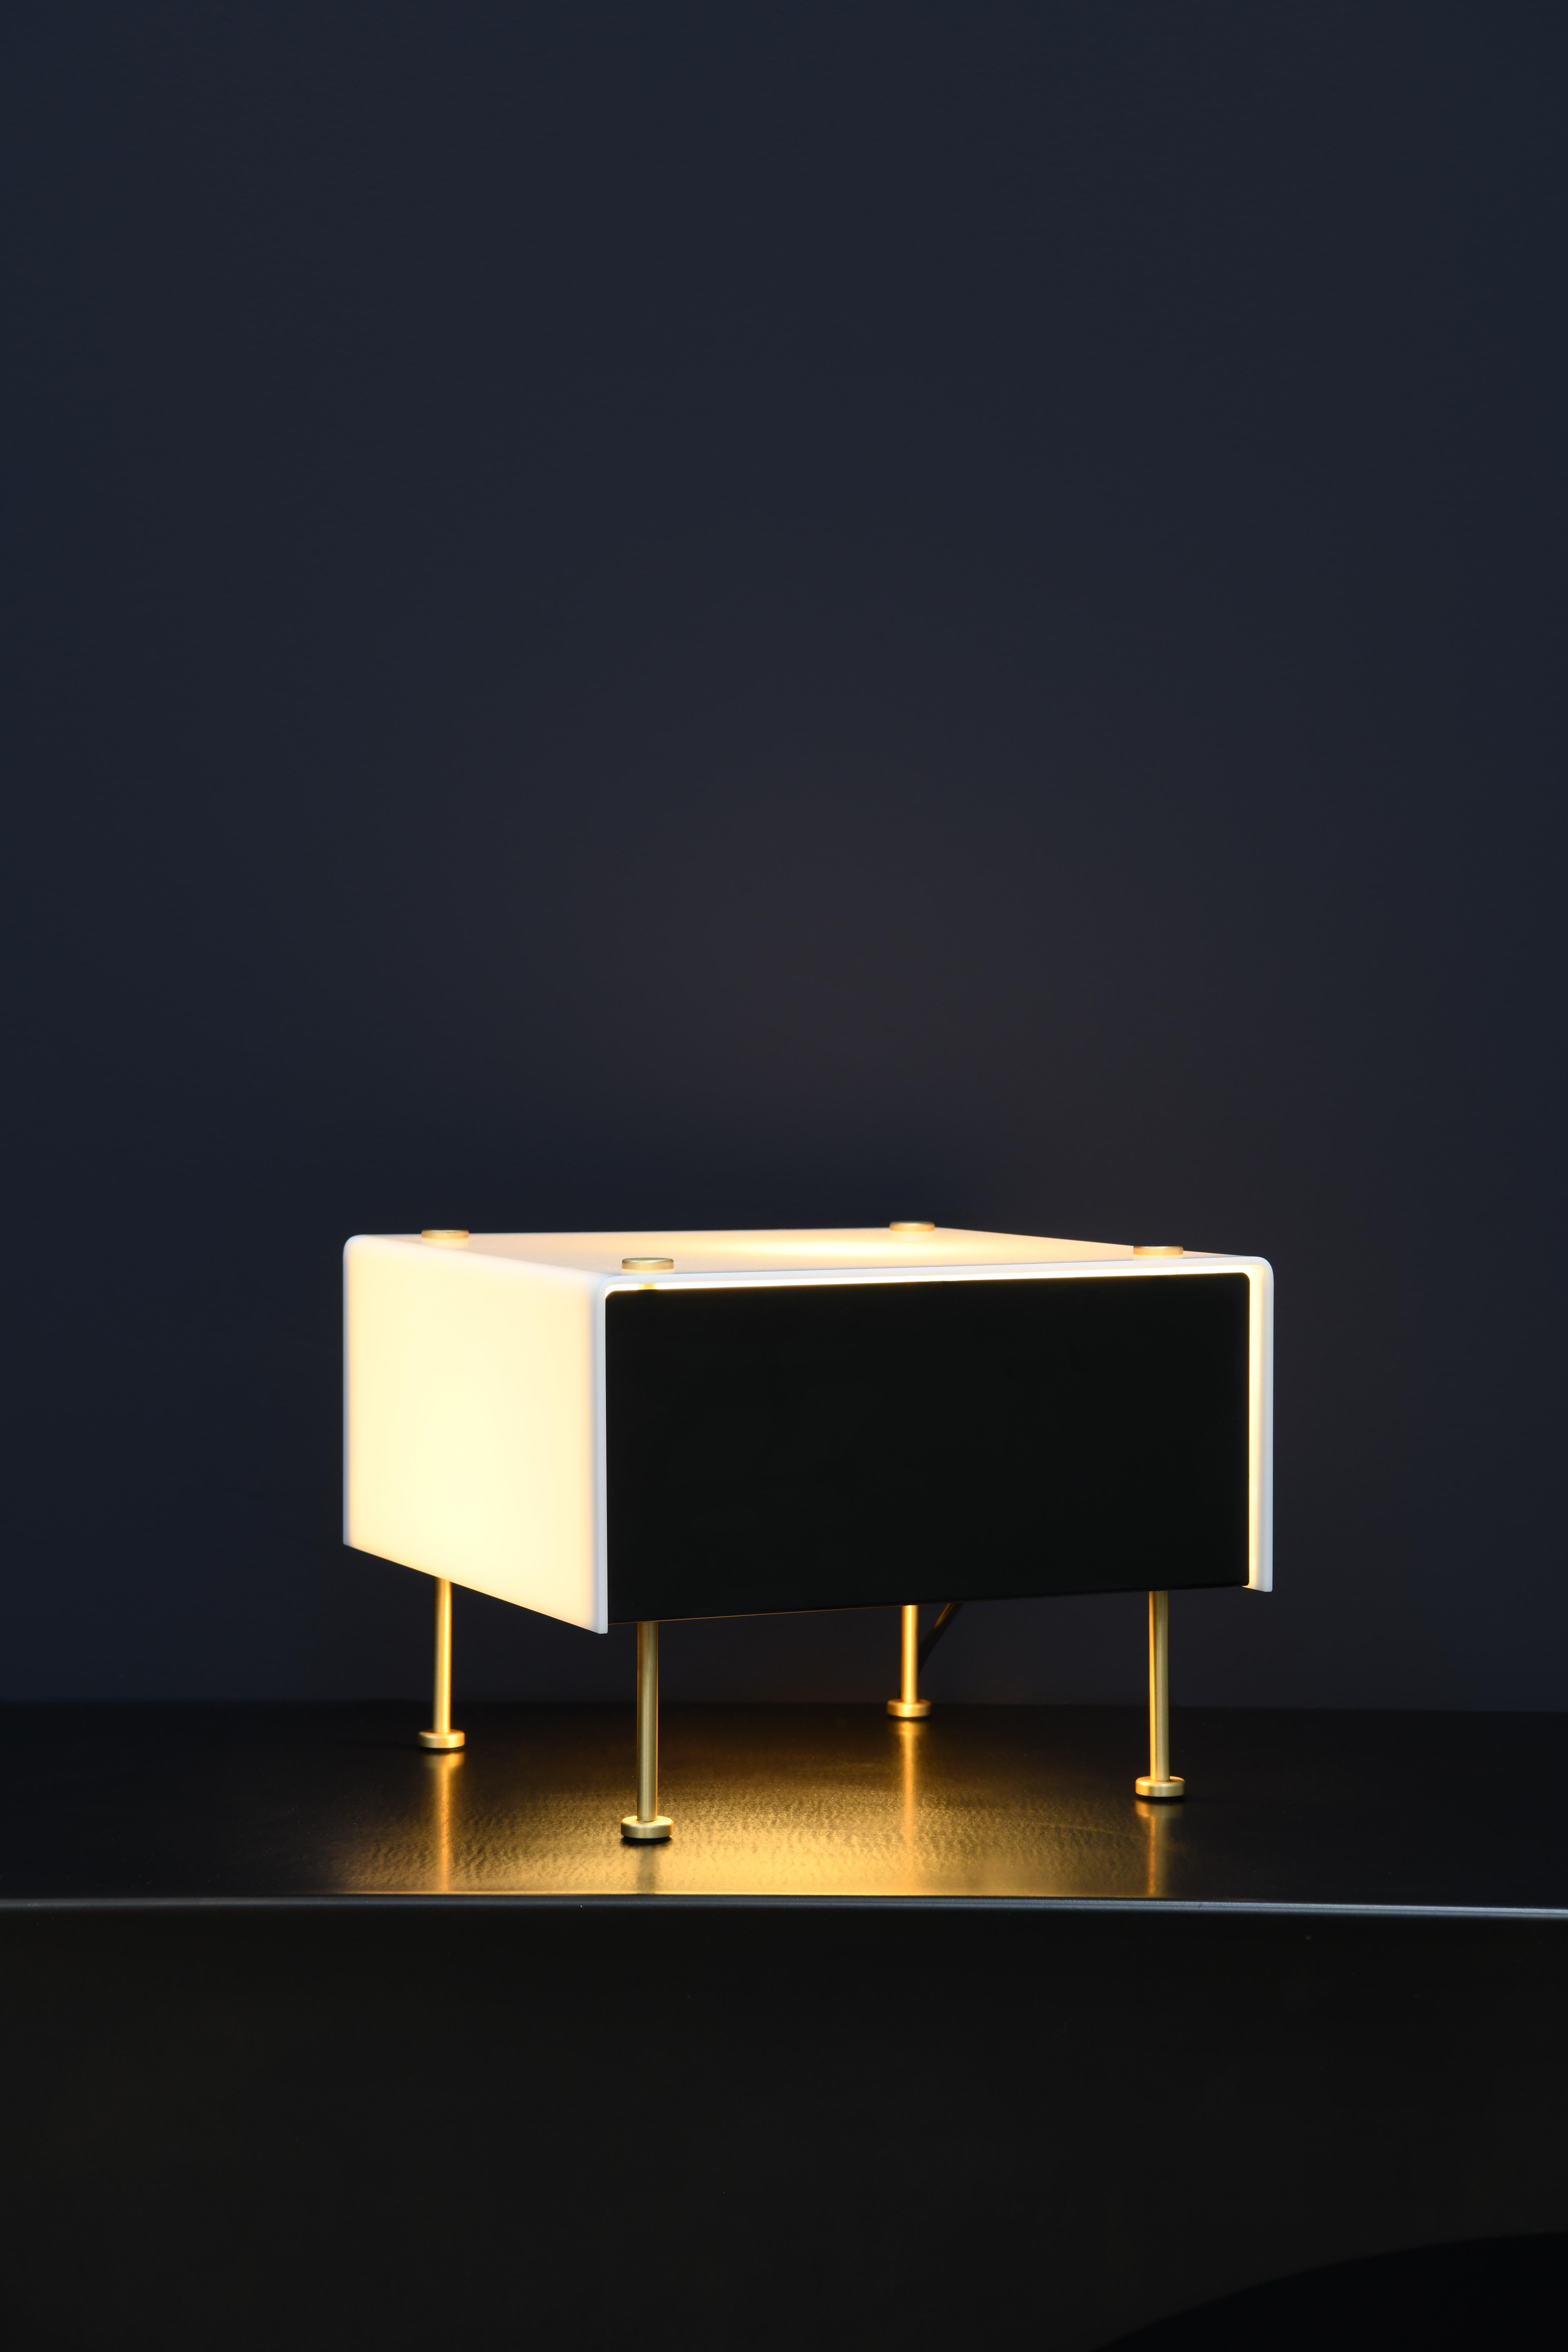 Pierre Guariche 'G60' table lamp for Sammode Studio. 

Originally designed by Pierre Guariche, this iconic luminaire is a newly produced authorized re-edition by Sammode Studio in France embracing many of the same small-scale manufacturing